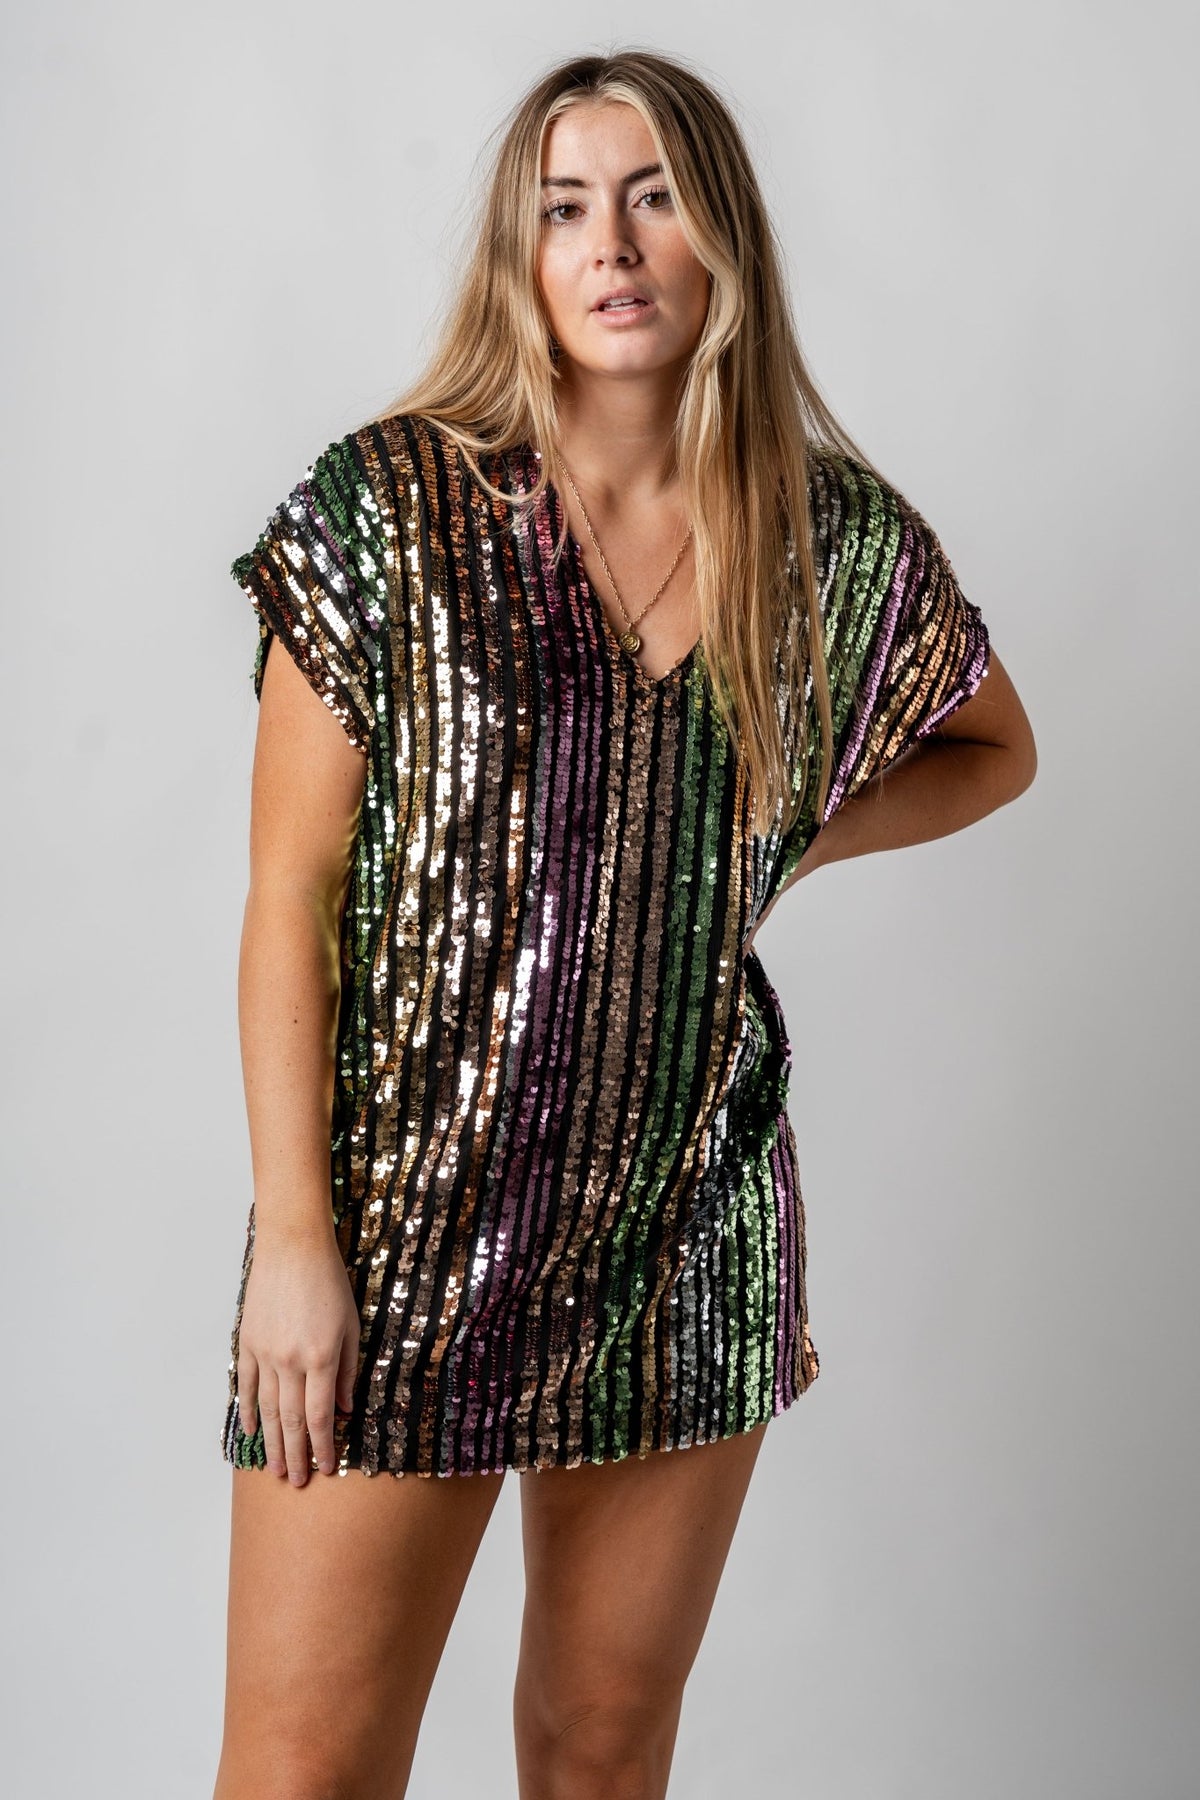 Sequin hyped in stripes dress black multi - Cute dress - Trendy Dresses at Lush Fashion Lounge Boutique in Oklahoma City